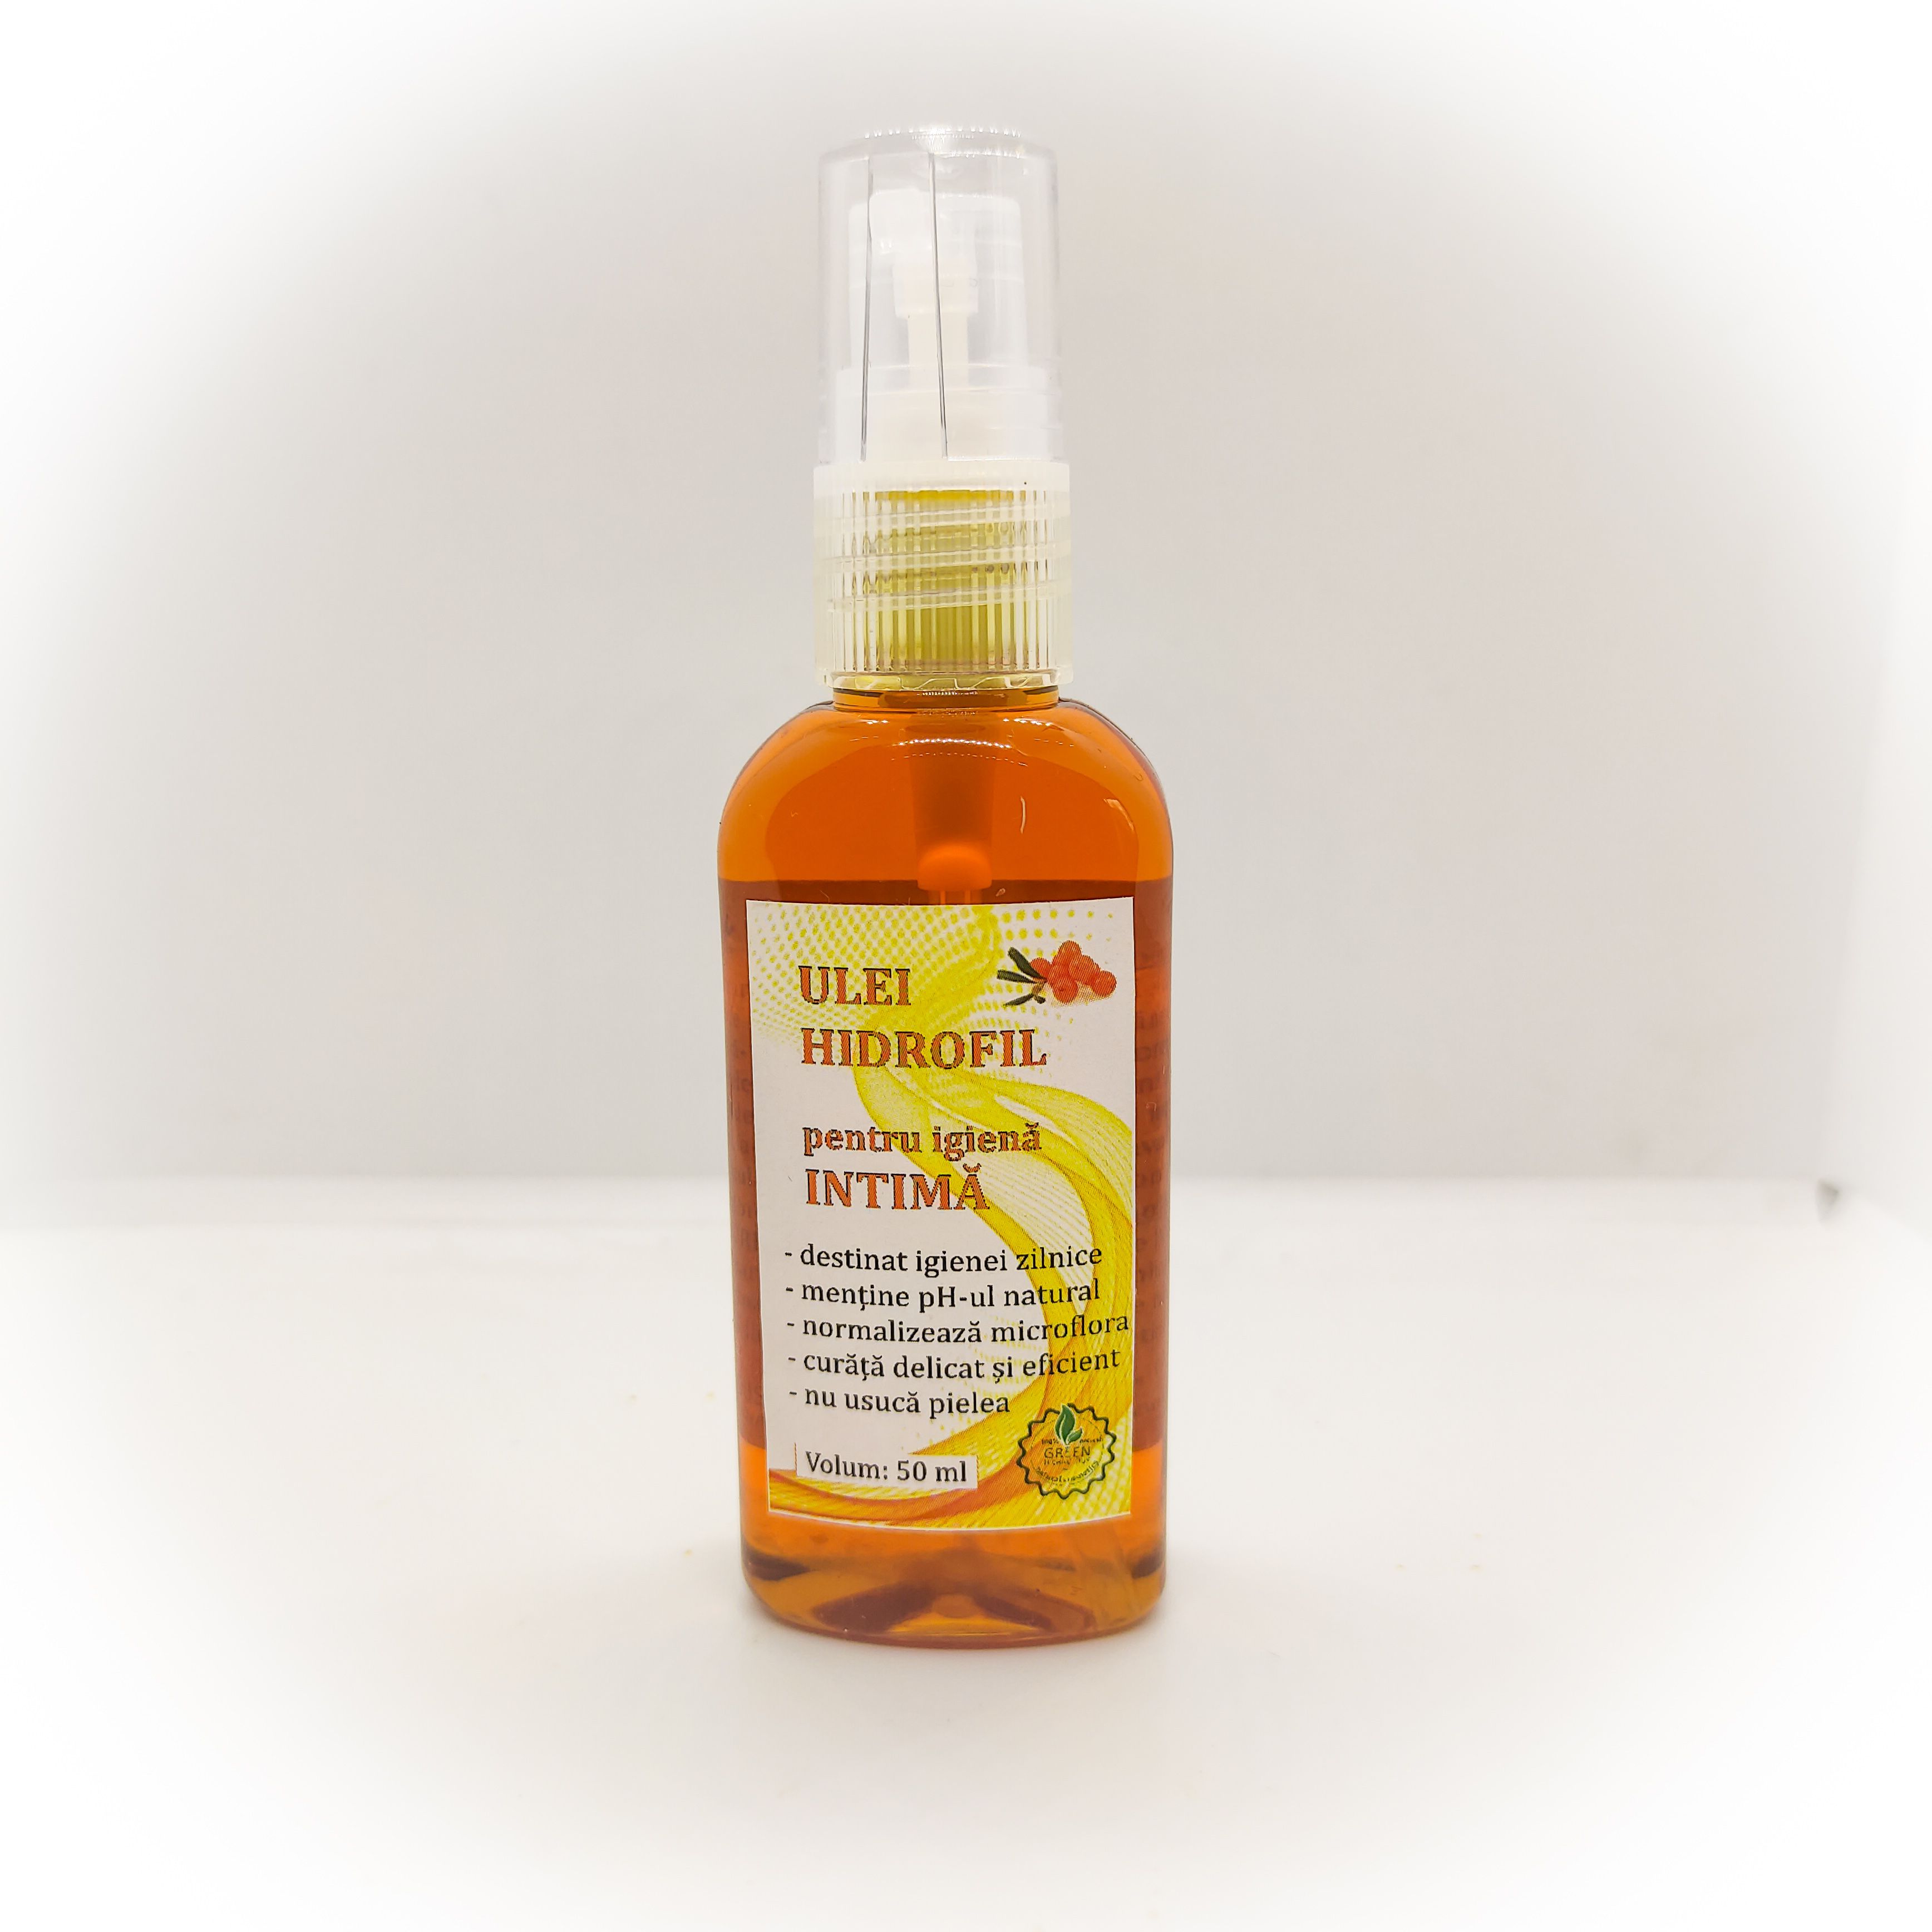 Hydrophilic Oil for Intimate Care